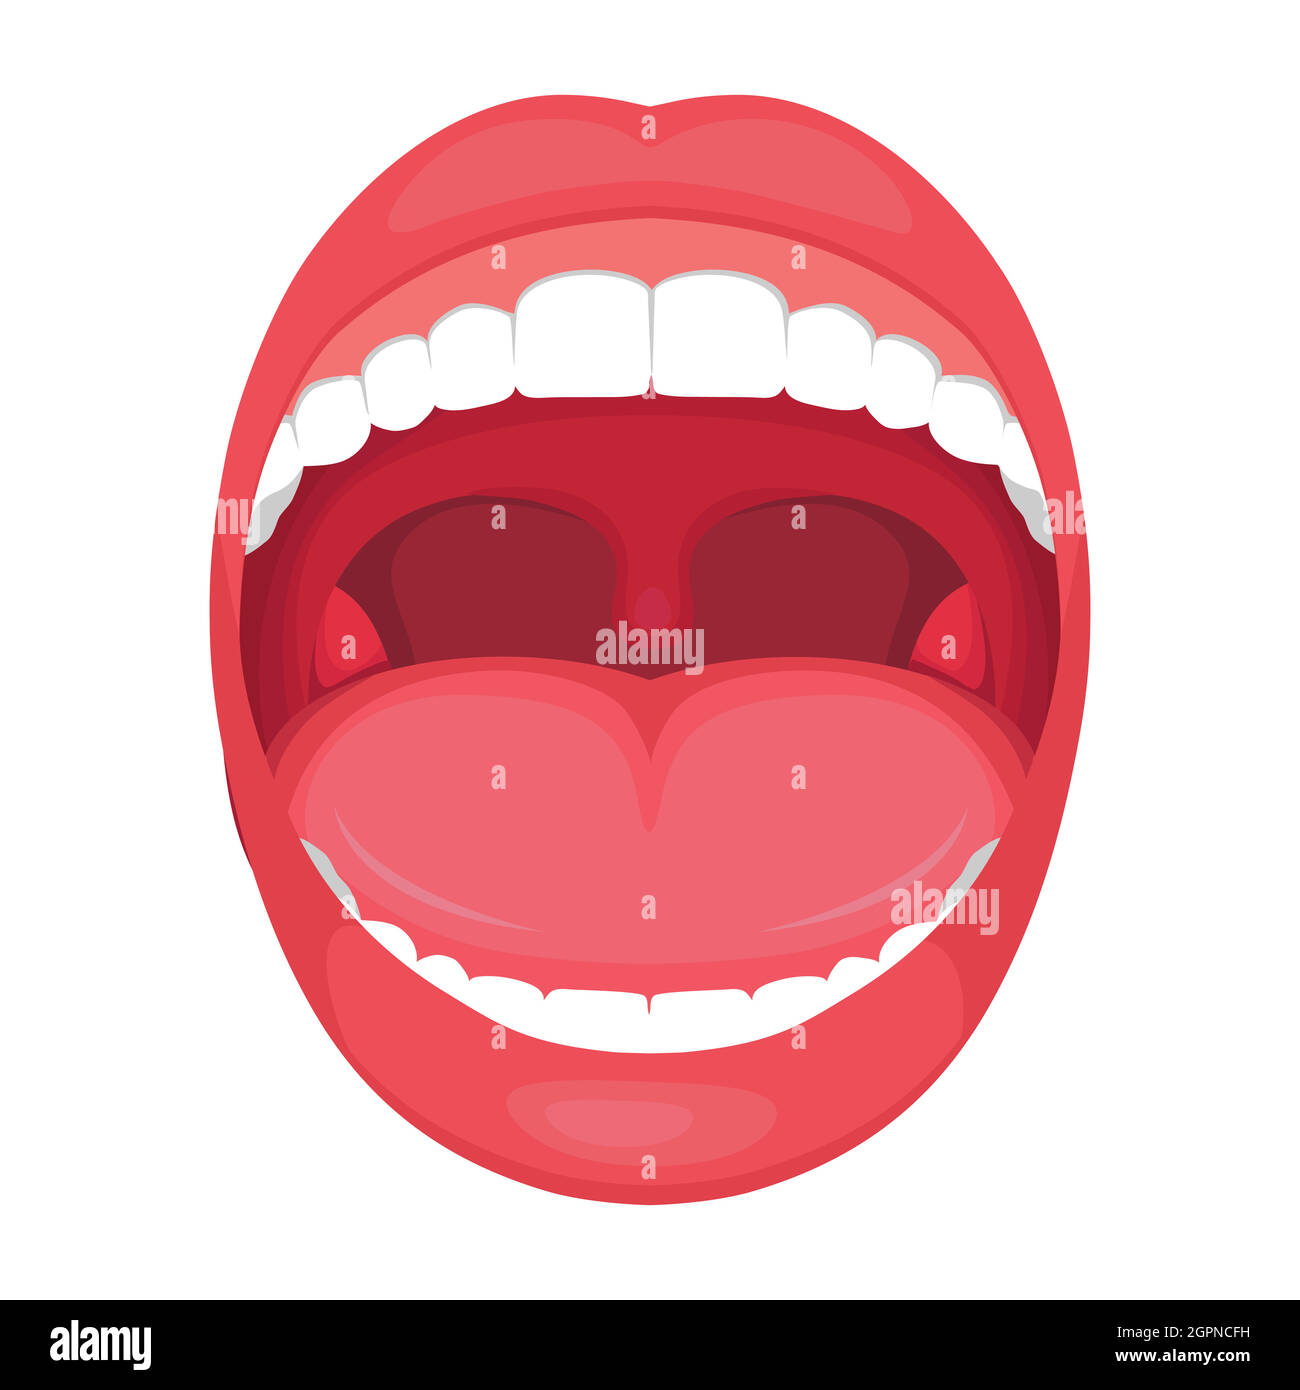 anatomy human open mouth. medical illustration Stock Vector